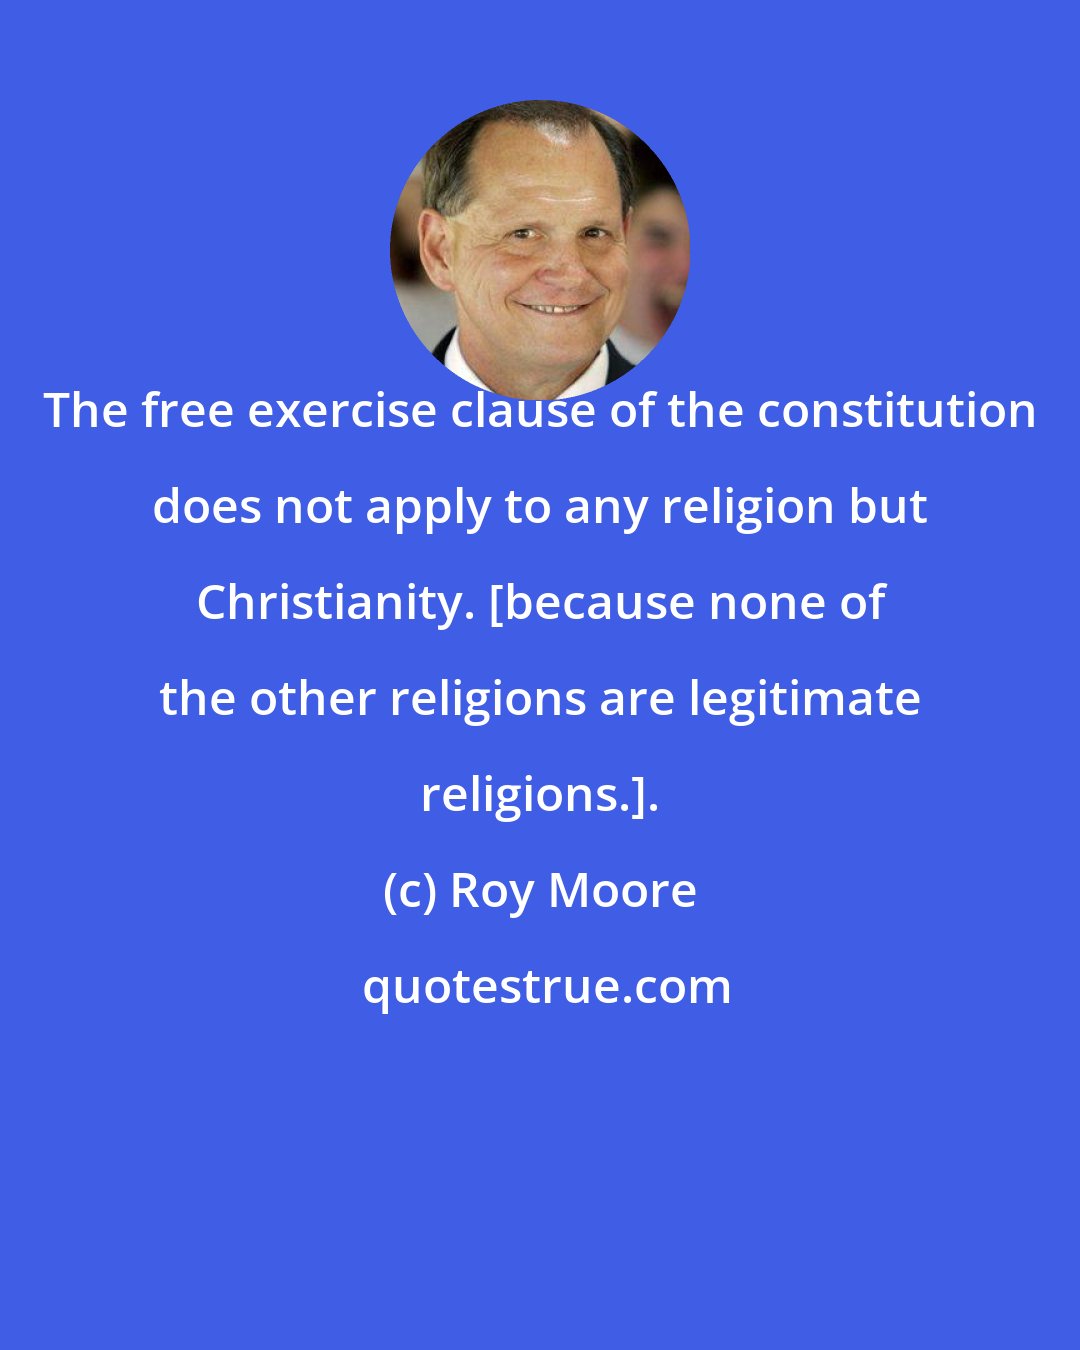 Roy Moore: The free exercise clause of the constitution does not apply to any religion but Christianity. [because none of the other religions are legitimate religions.].